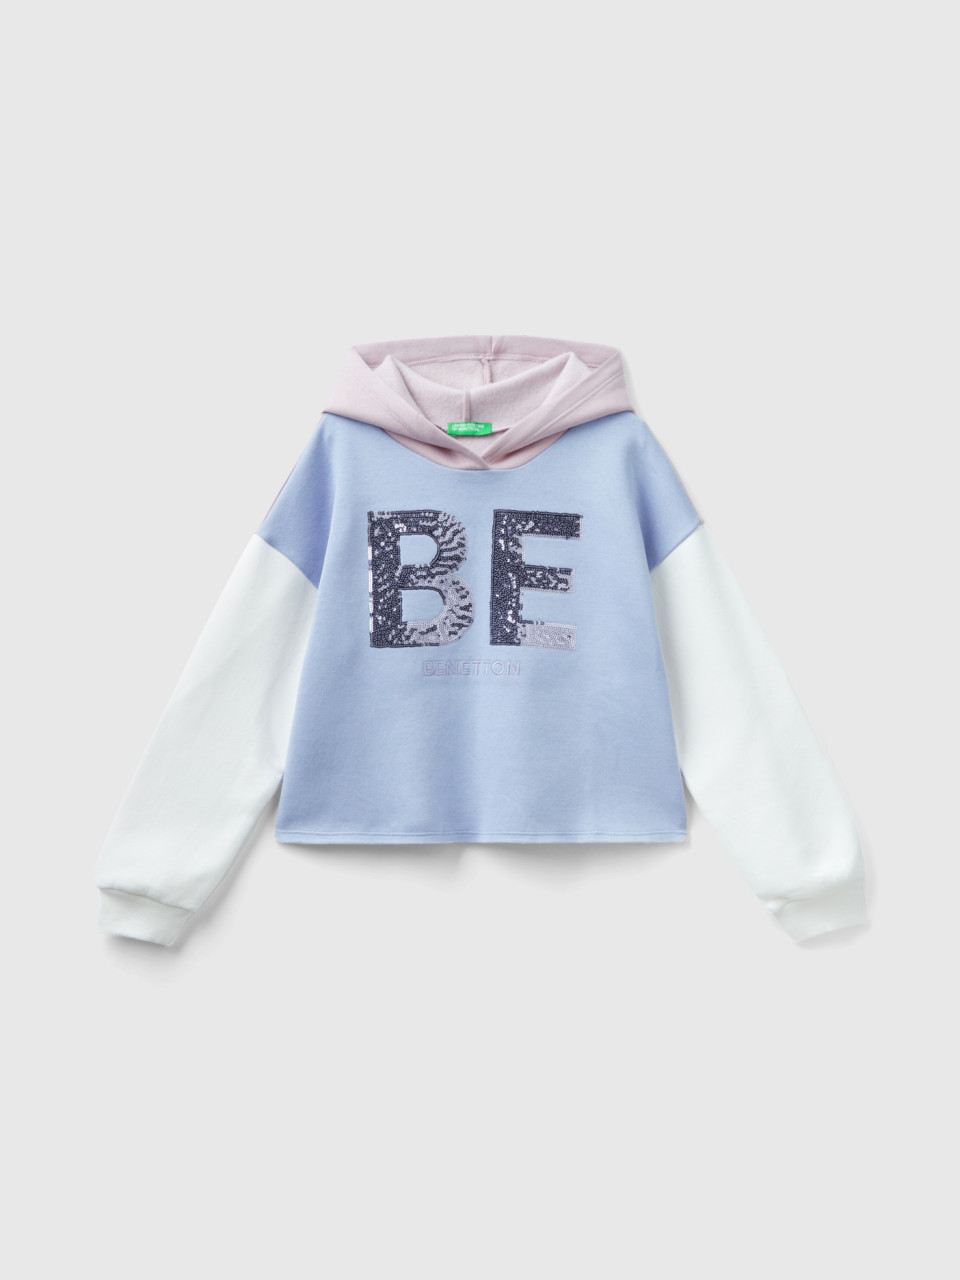 Benetton, Hoodie With Sequins, Multi-color, Kids